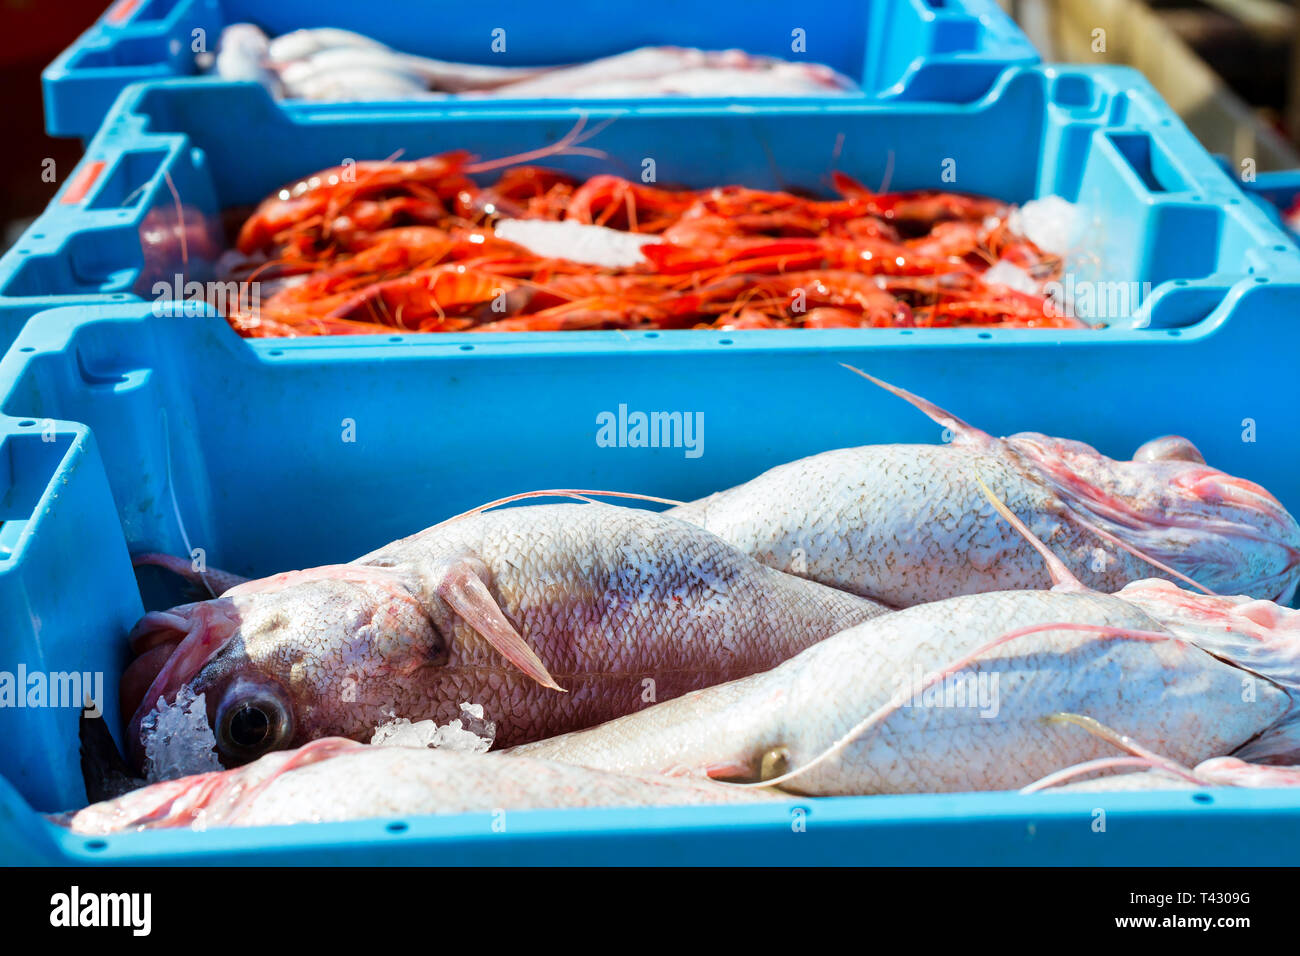 Blue plastic containers with catch of sea fish, ocean delicacies. Industrial catch of fresh fish. Fish auction for wholesalers and restaurants. Blanes Stock Photo